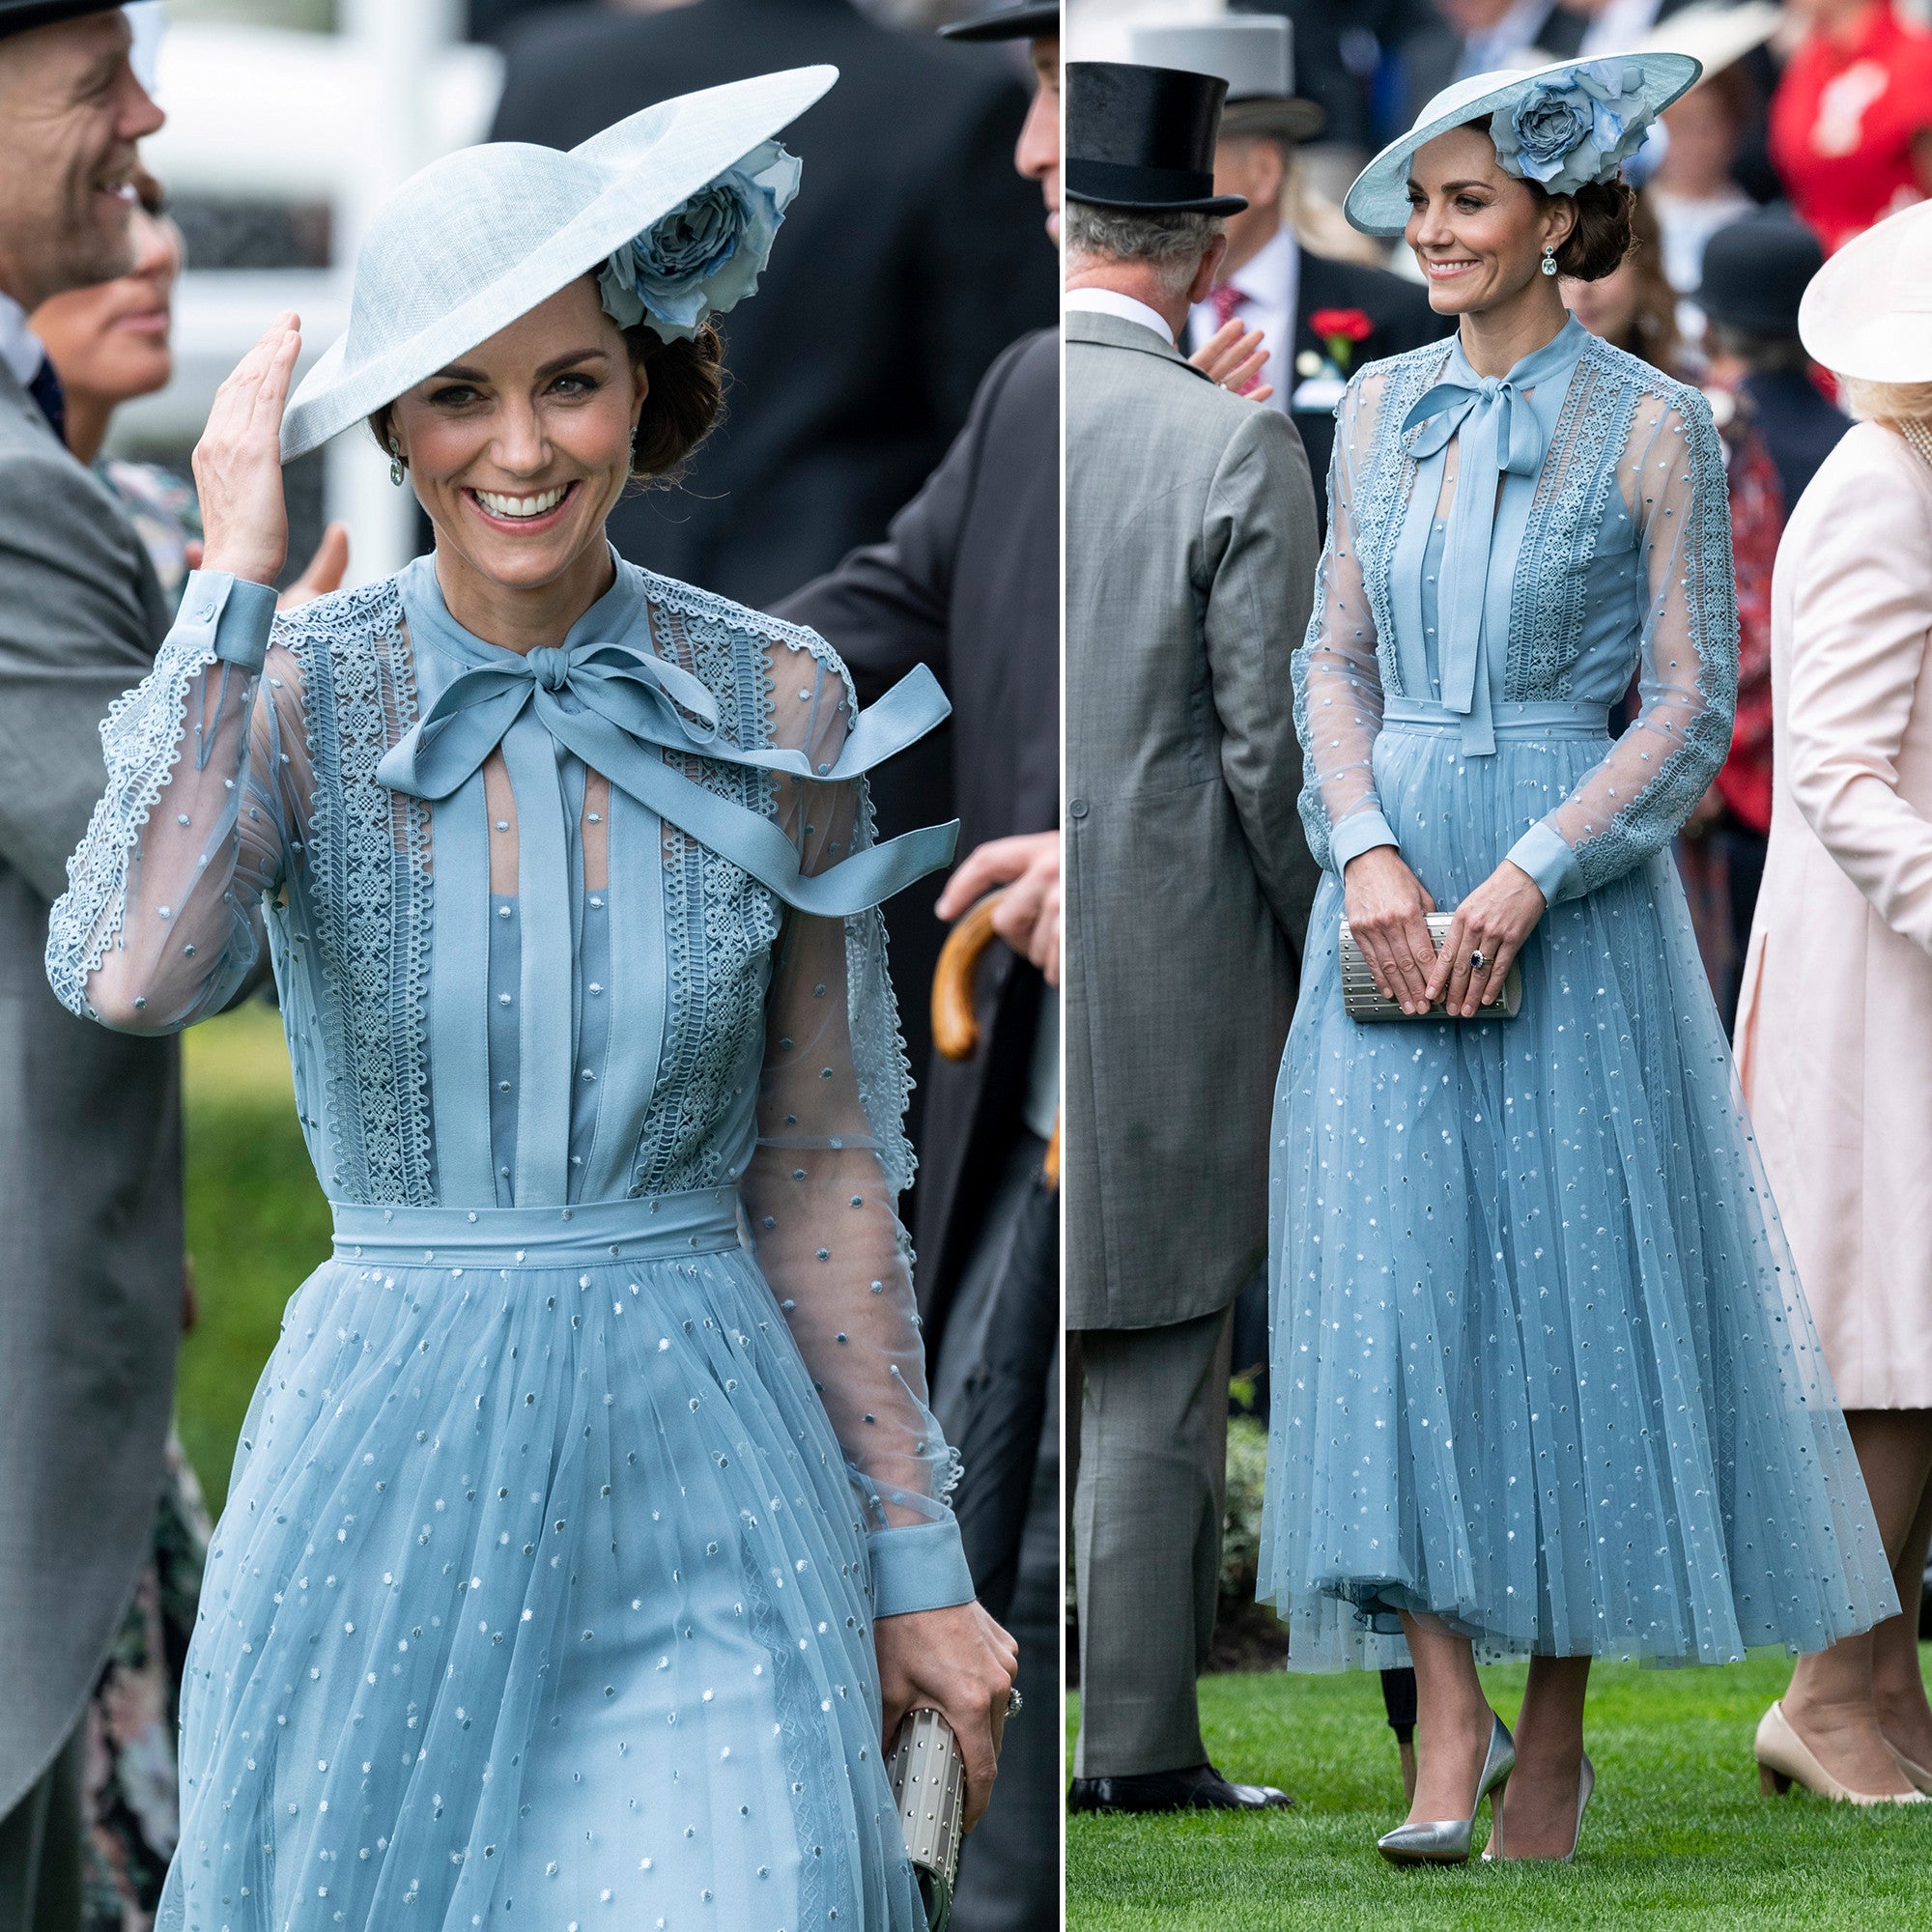 Kate Middleton Wears a Sheer Blue Elie Saab Dress to the 2019 Royal Ascot